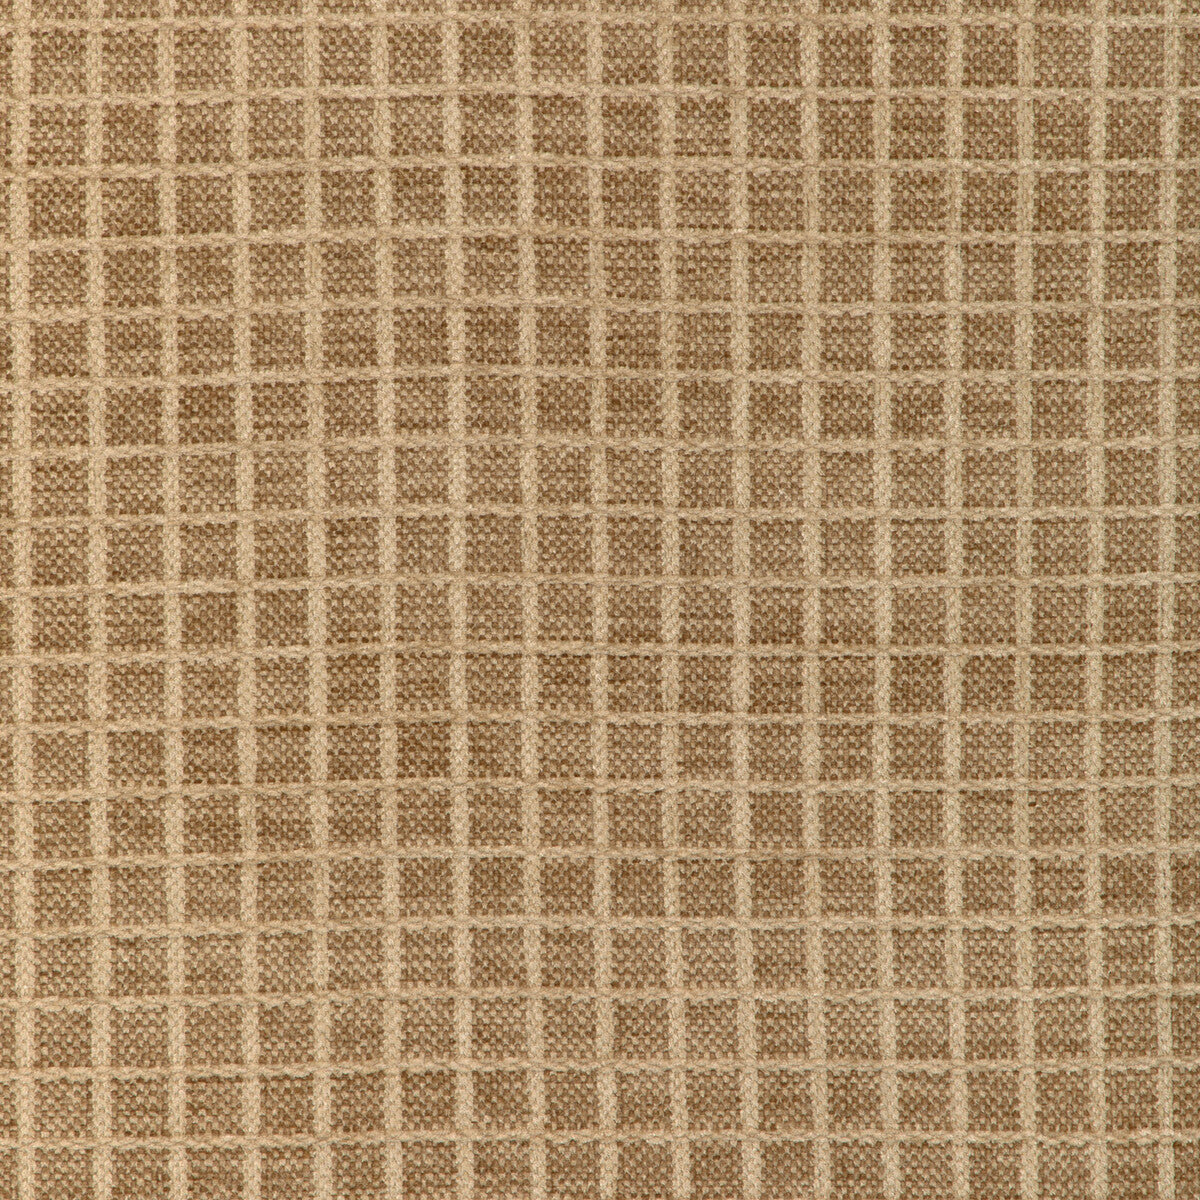 Chiron Texture fabric in beige color - pattern 8023155.16.0 - by Brunschwig &amp; Fils in the Chambery Textures IV collection